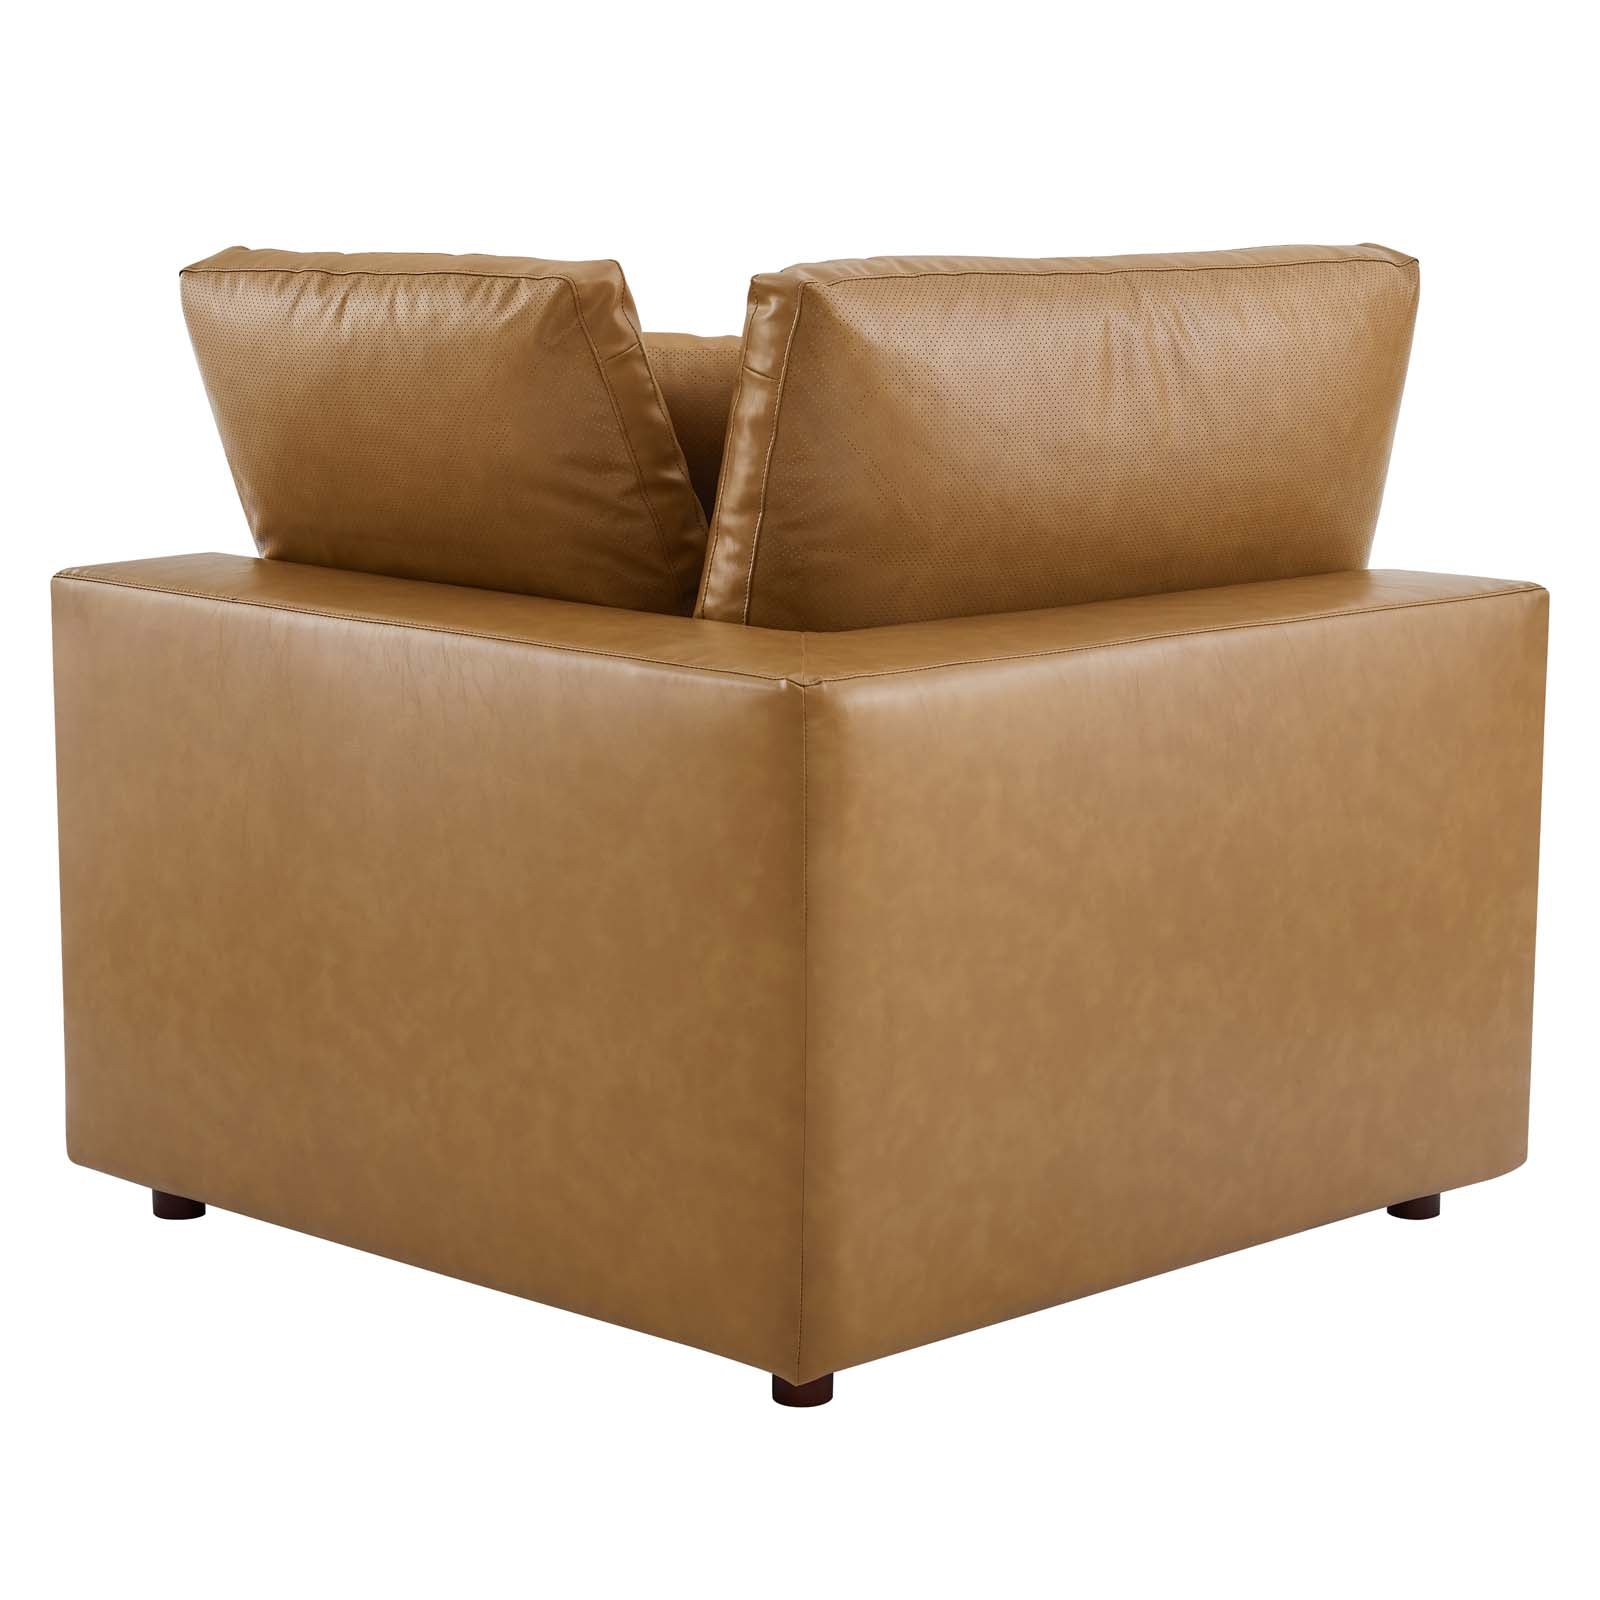 Modway Sectional Sofas - Commix Down Filled Overstuffed Vegan Leather 6 Piece Sectional Sofa Tan